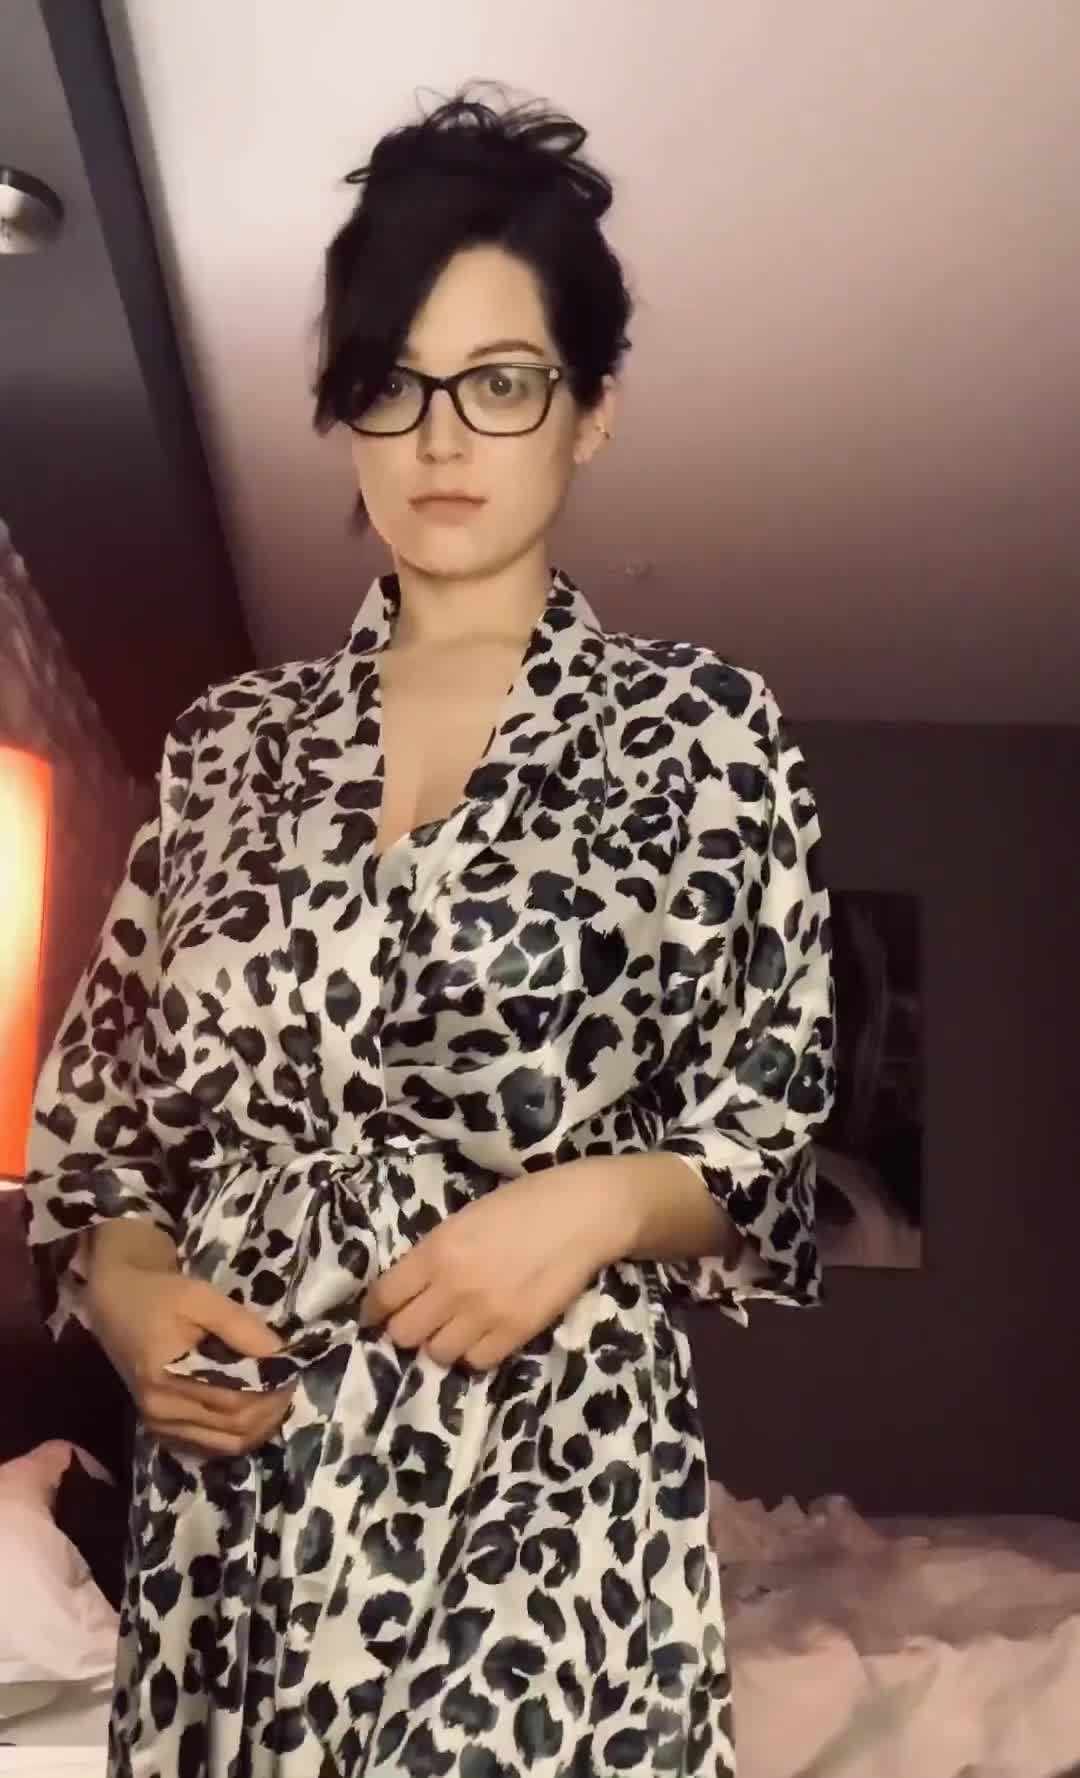 Watch the Video by bukowski h with the username @bukowski_h, posted on February 1, 2021 and the text says 'Probably best boobs you'll see today ♥♥♥'